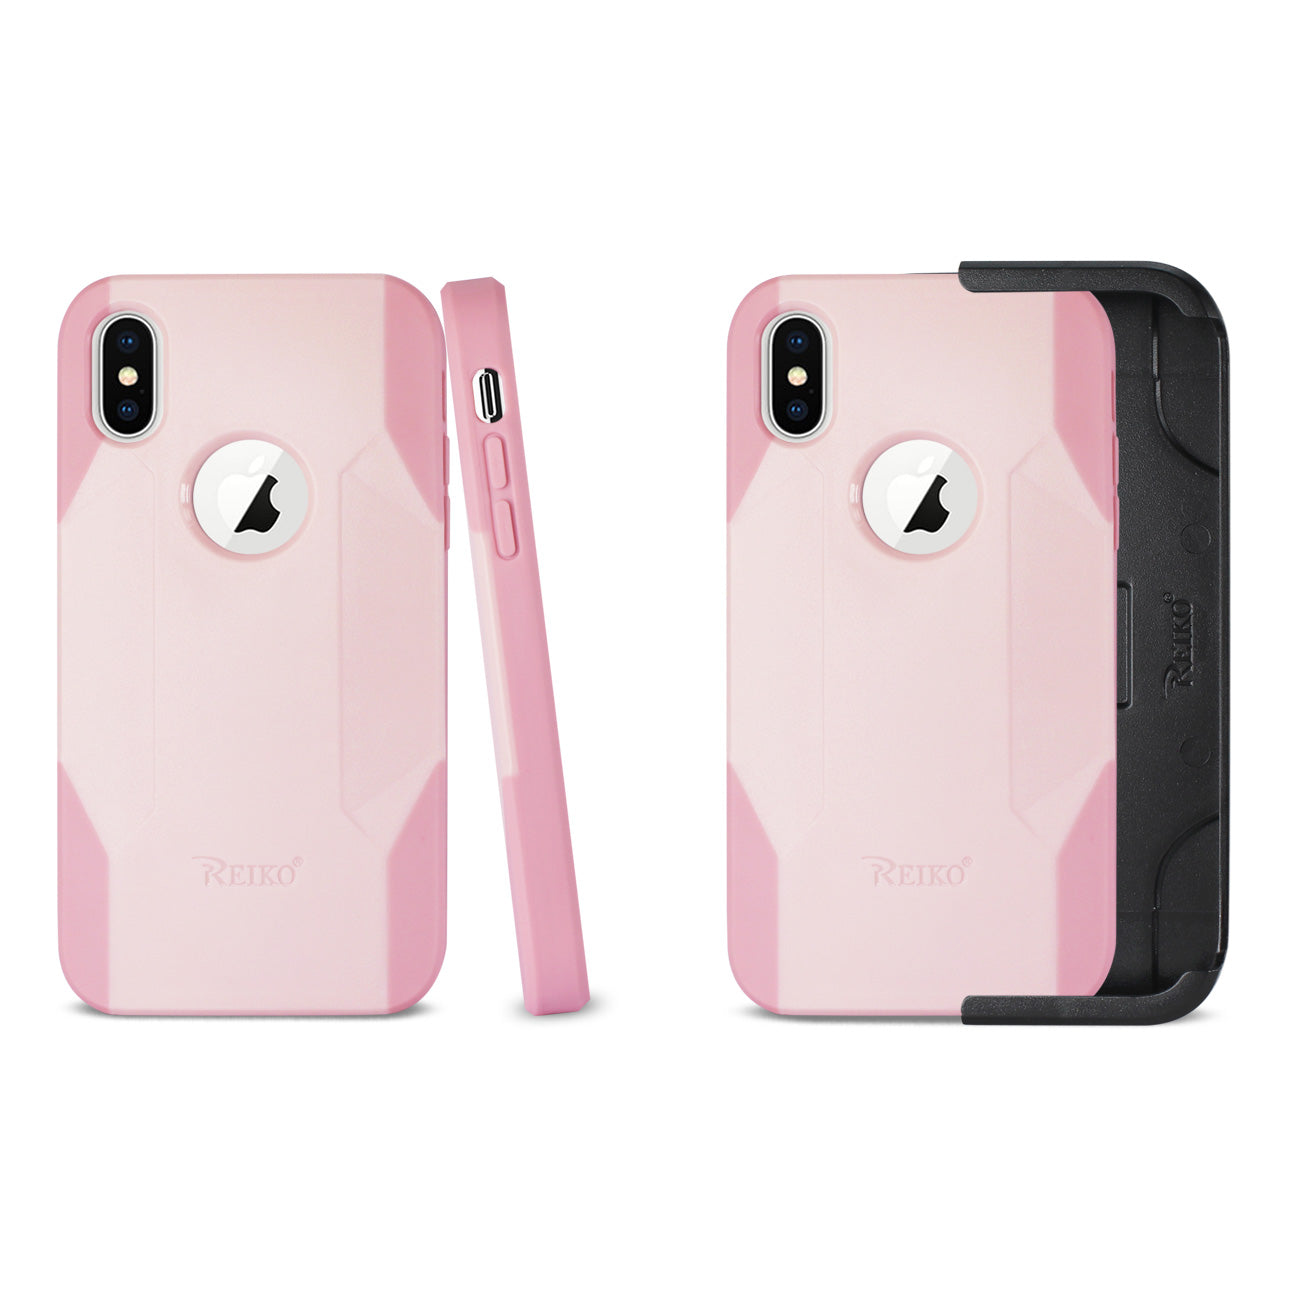 REIKO iPhone X/iPhone XS 3-IN-1 HYBRID HEAVY DUTY HOLSTER COMBO CASE IN LIGHT PINK